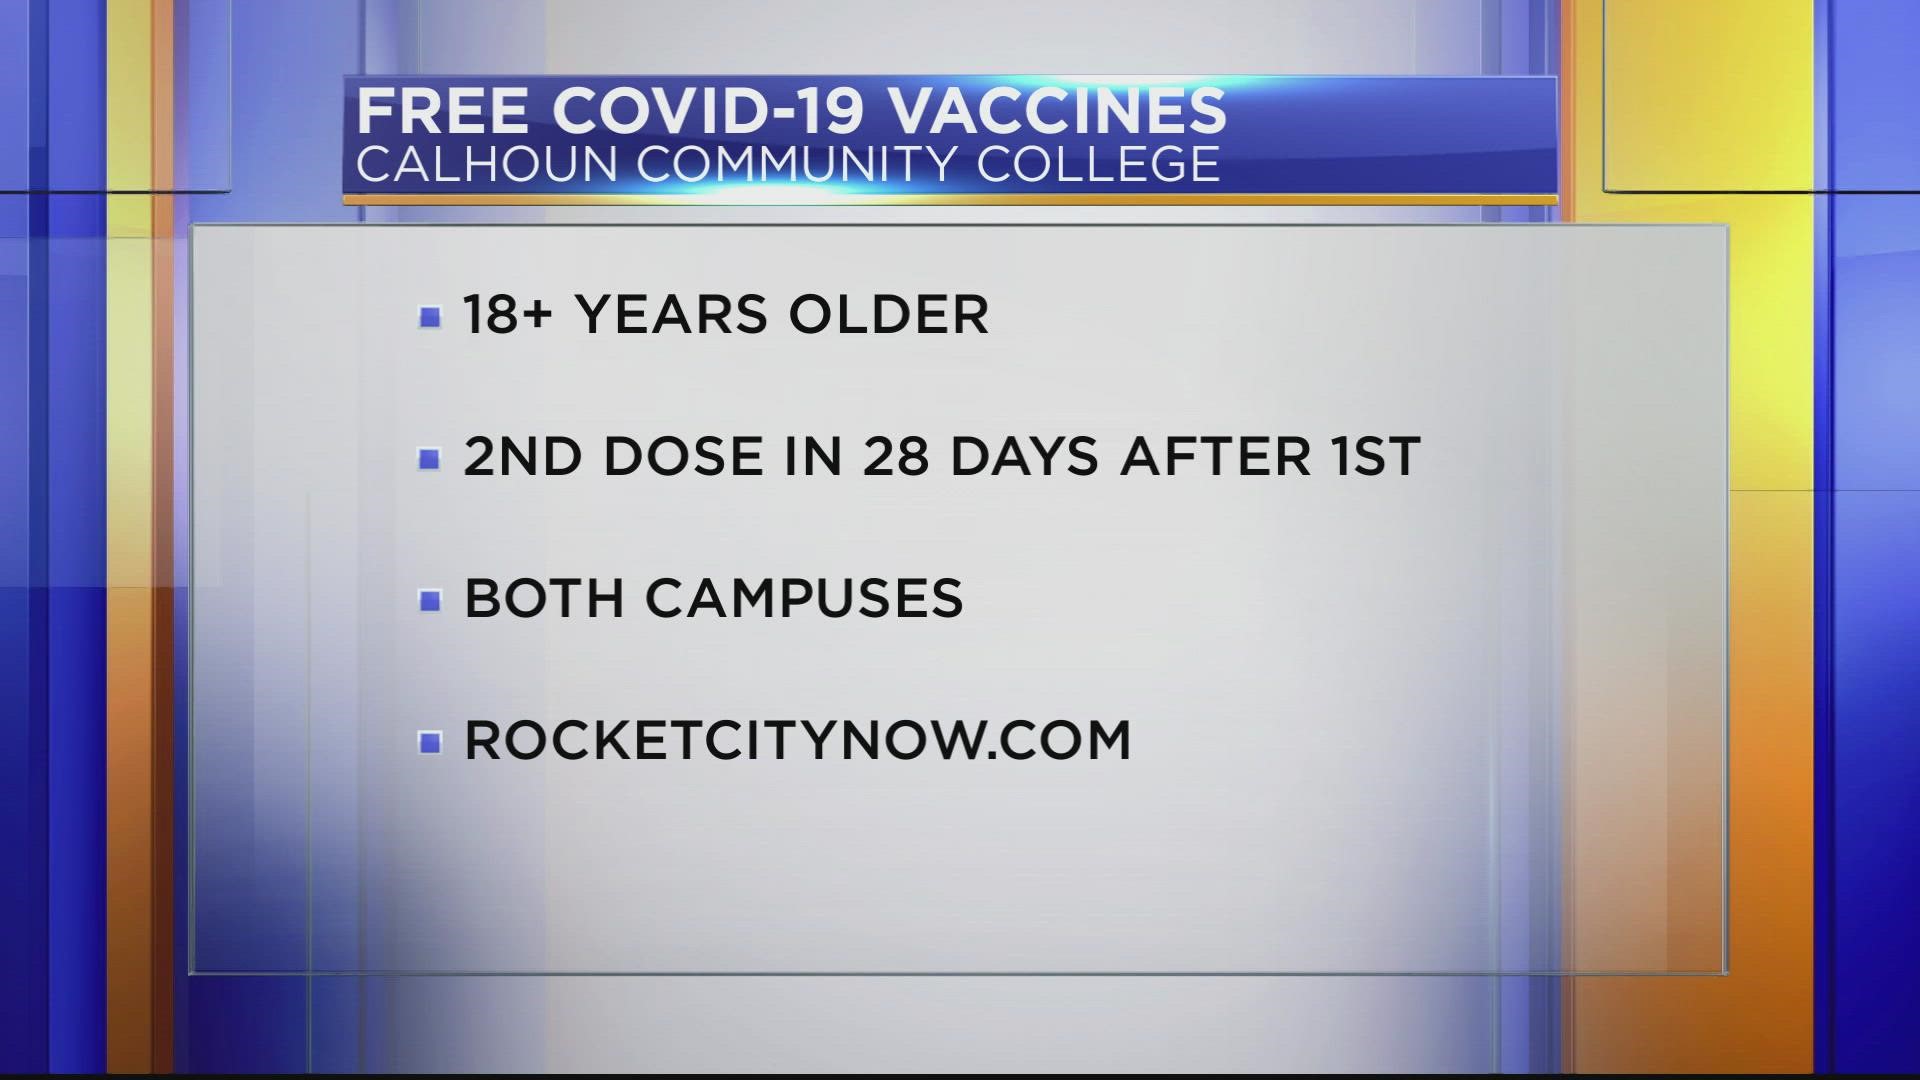 Anyone ages 18 or older will be able to receive the Moderna COVID-19 vaccine at these free events.